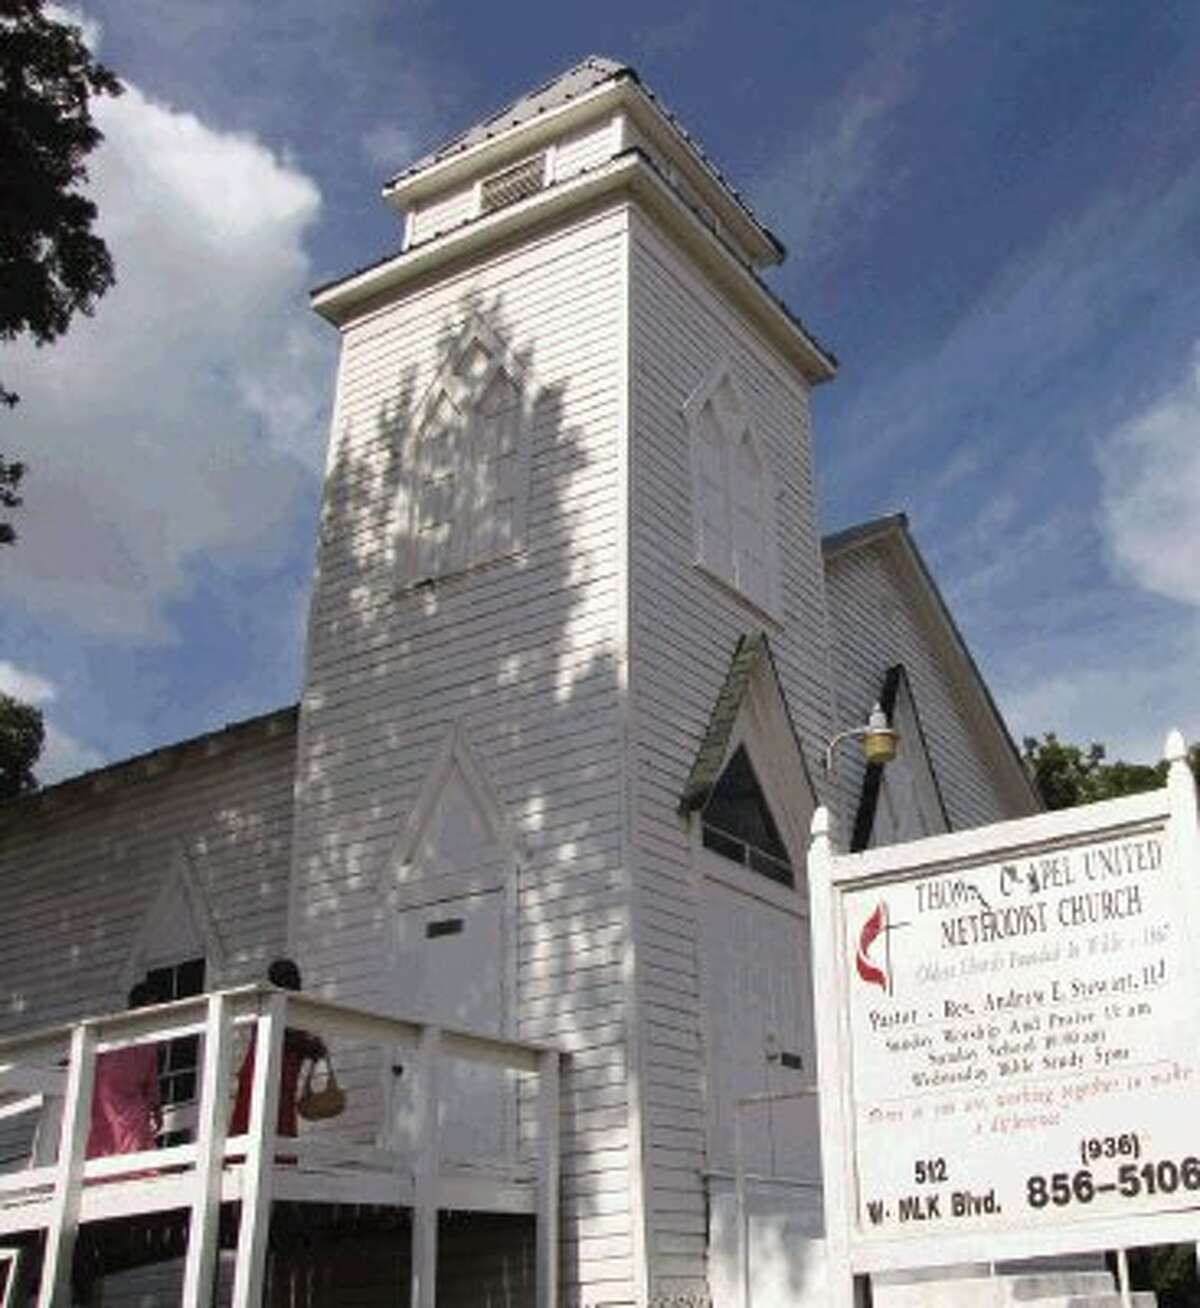 Thomas Chapel United Methodist Church celebrated its 145th anniversary Sunday. It is the oldest church in Willis and one of the oldest in Montgomery County.